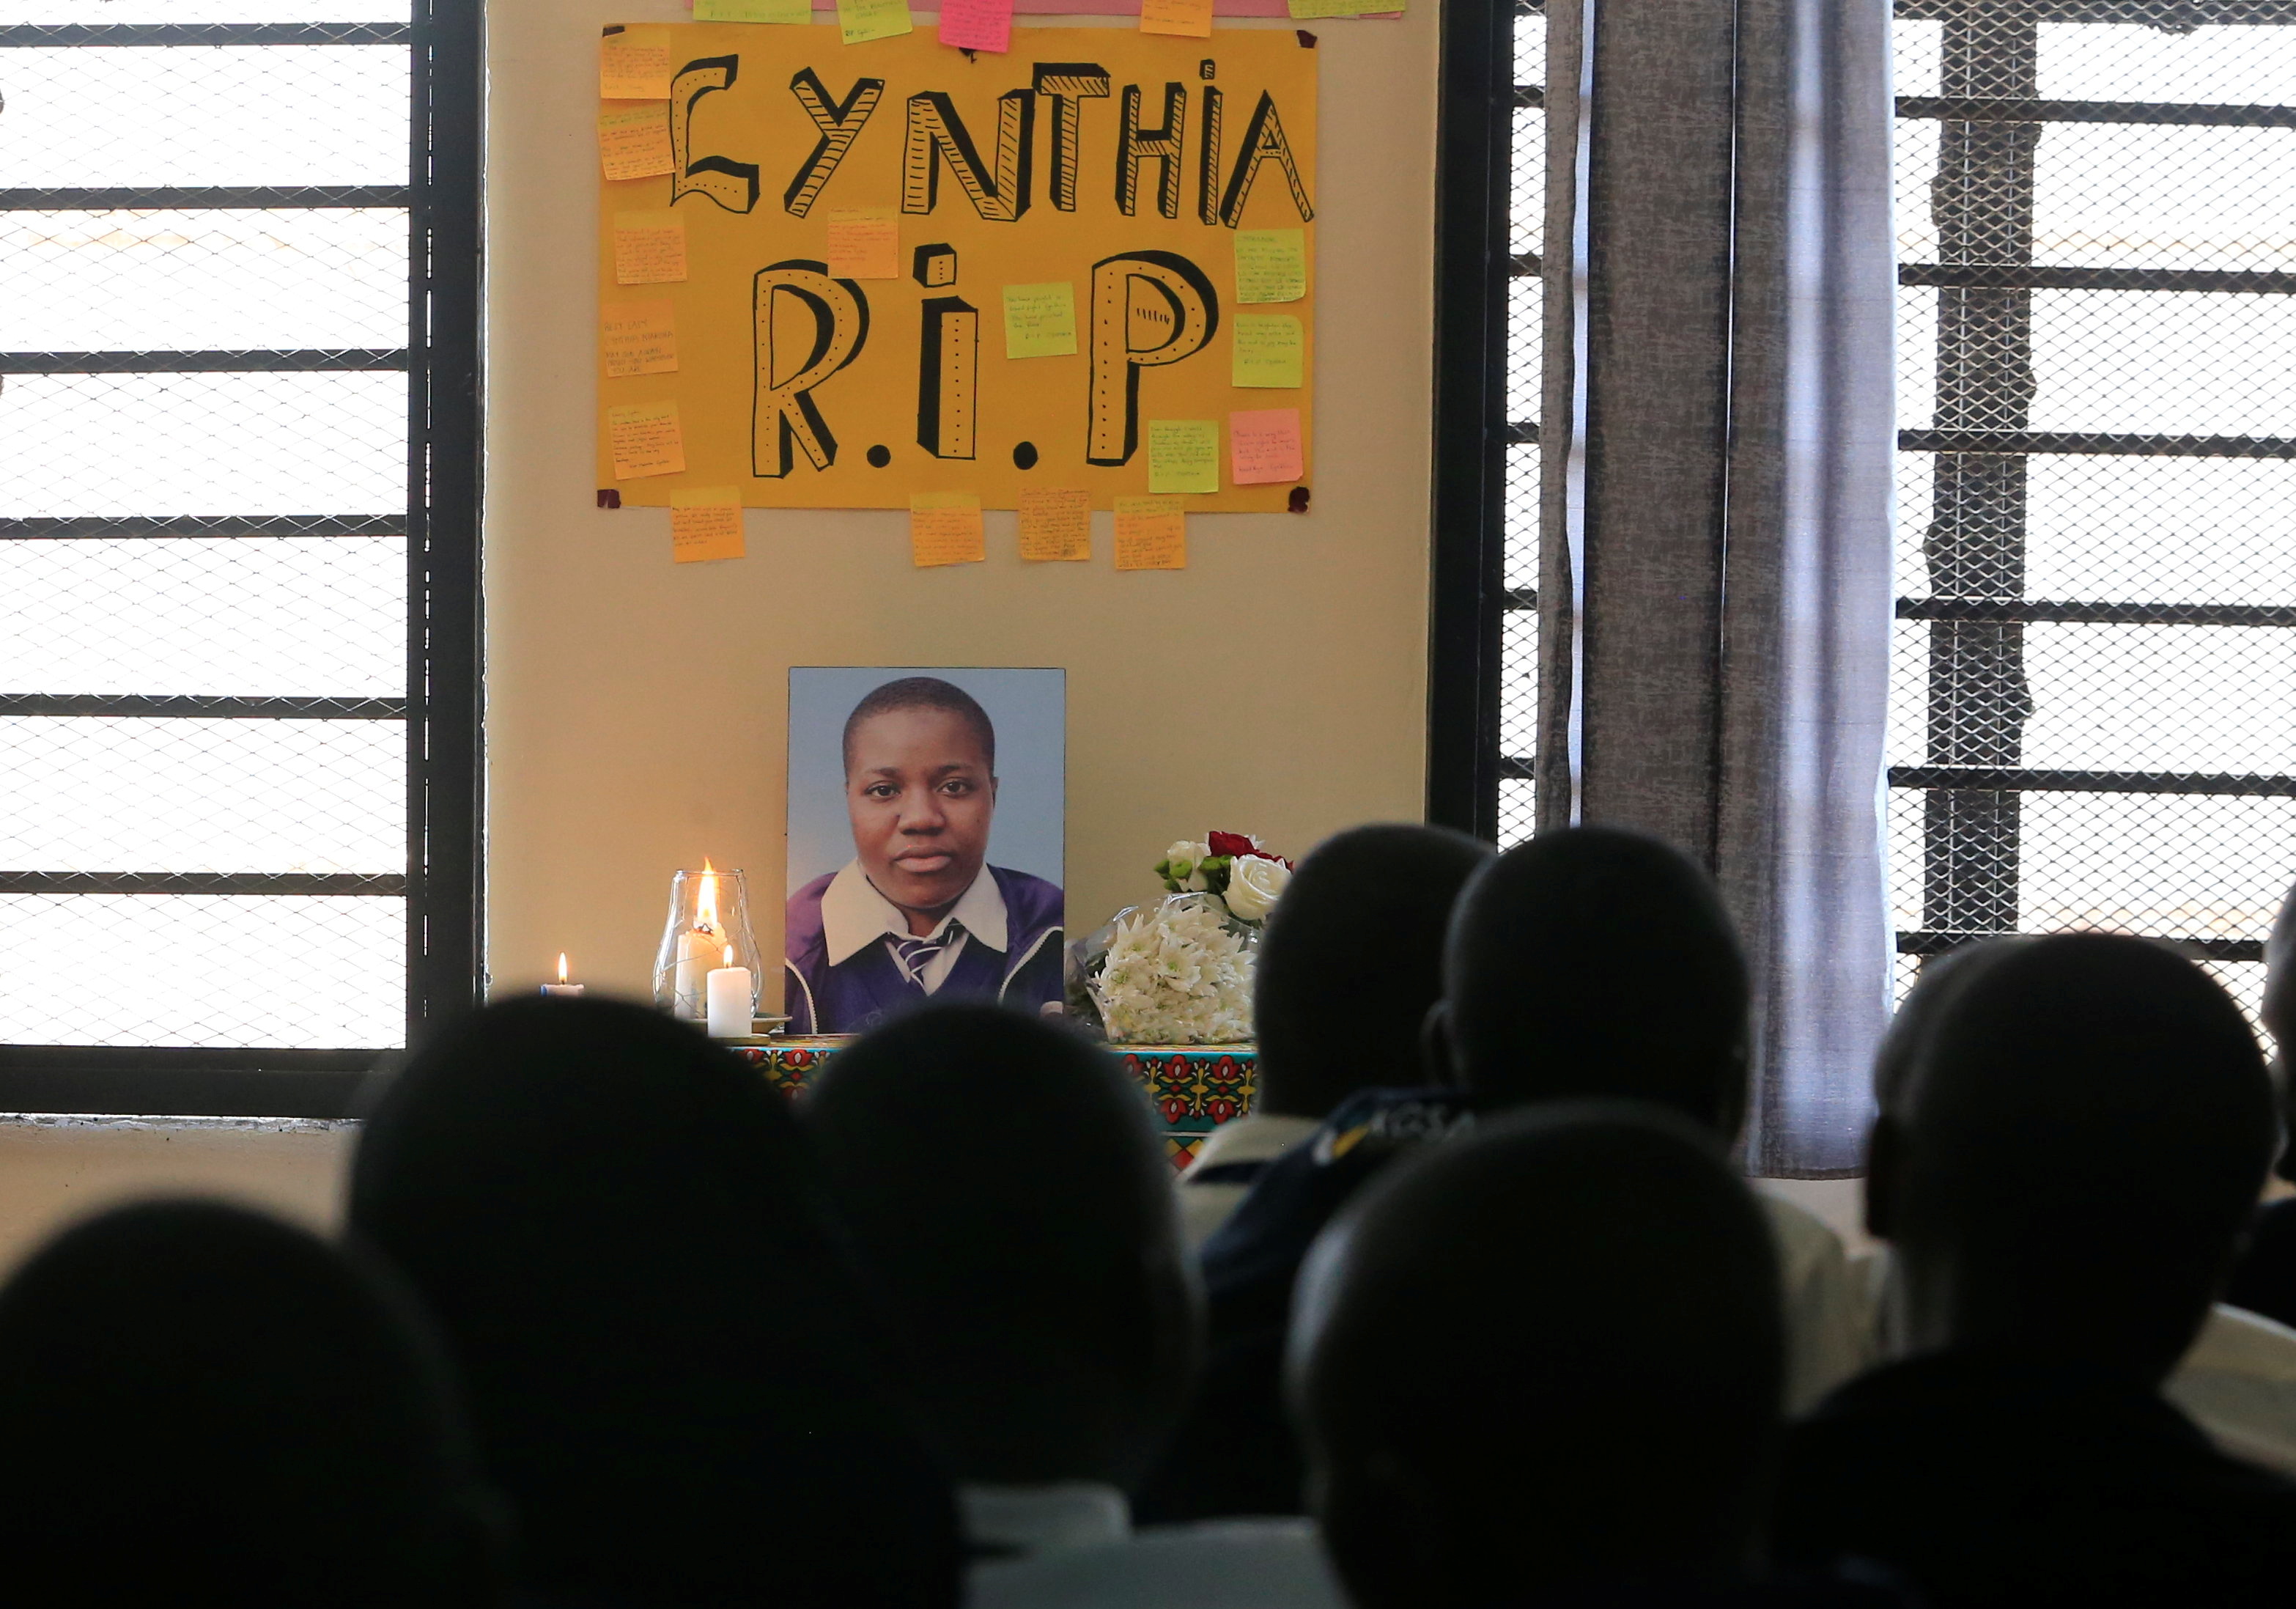 Students at the Kibera Girls School Soccer Academy (KGSA) attend a memorial service for Cynthia Makokha (on the photograph), a teenage student who was raped and killed as she travelled home for school holidays, in Kibera district of Nairobi, Kenya October 15, 2021. REUTERS/Thomas Mukoya